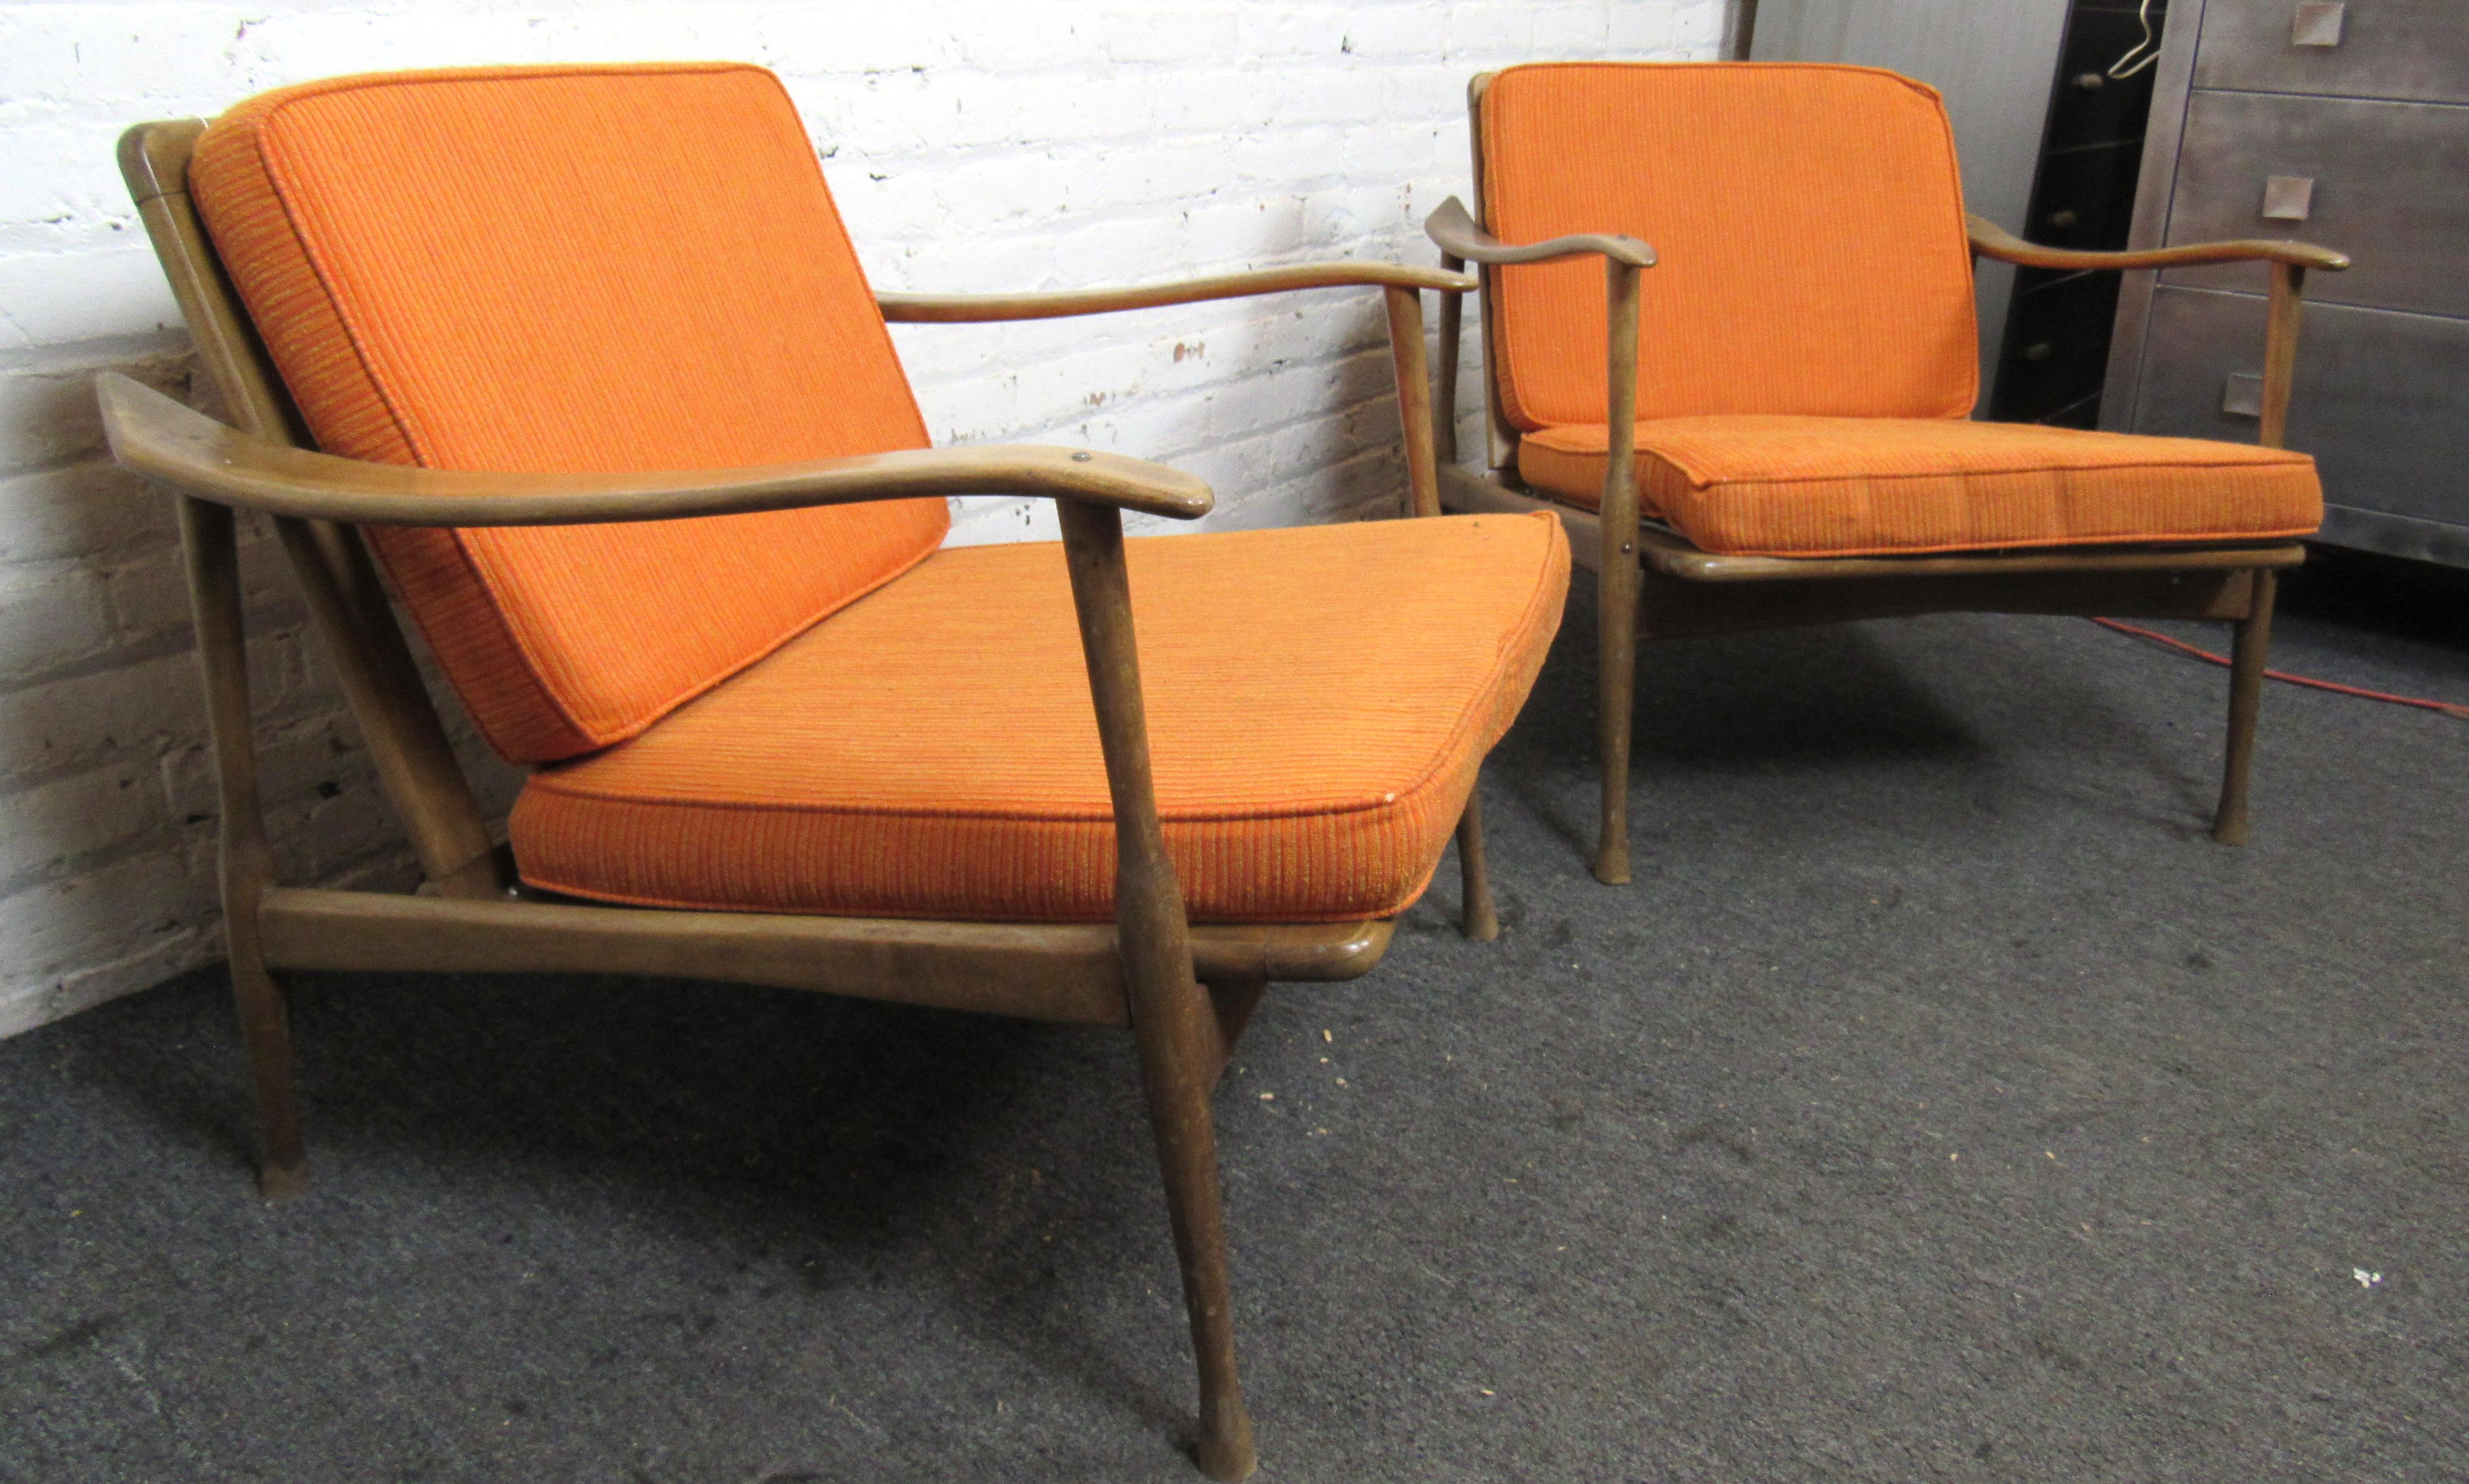 Pair of mid-century modern chairs with sculpted arm rests. Two simple cushions that can easily be recovered. Attractive slat back for mid room placement.

Please confirm location NY or NJ.